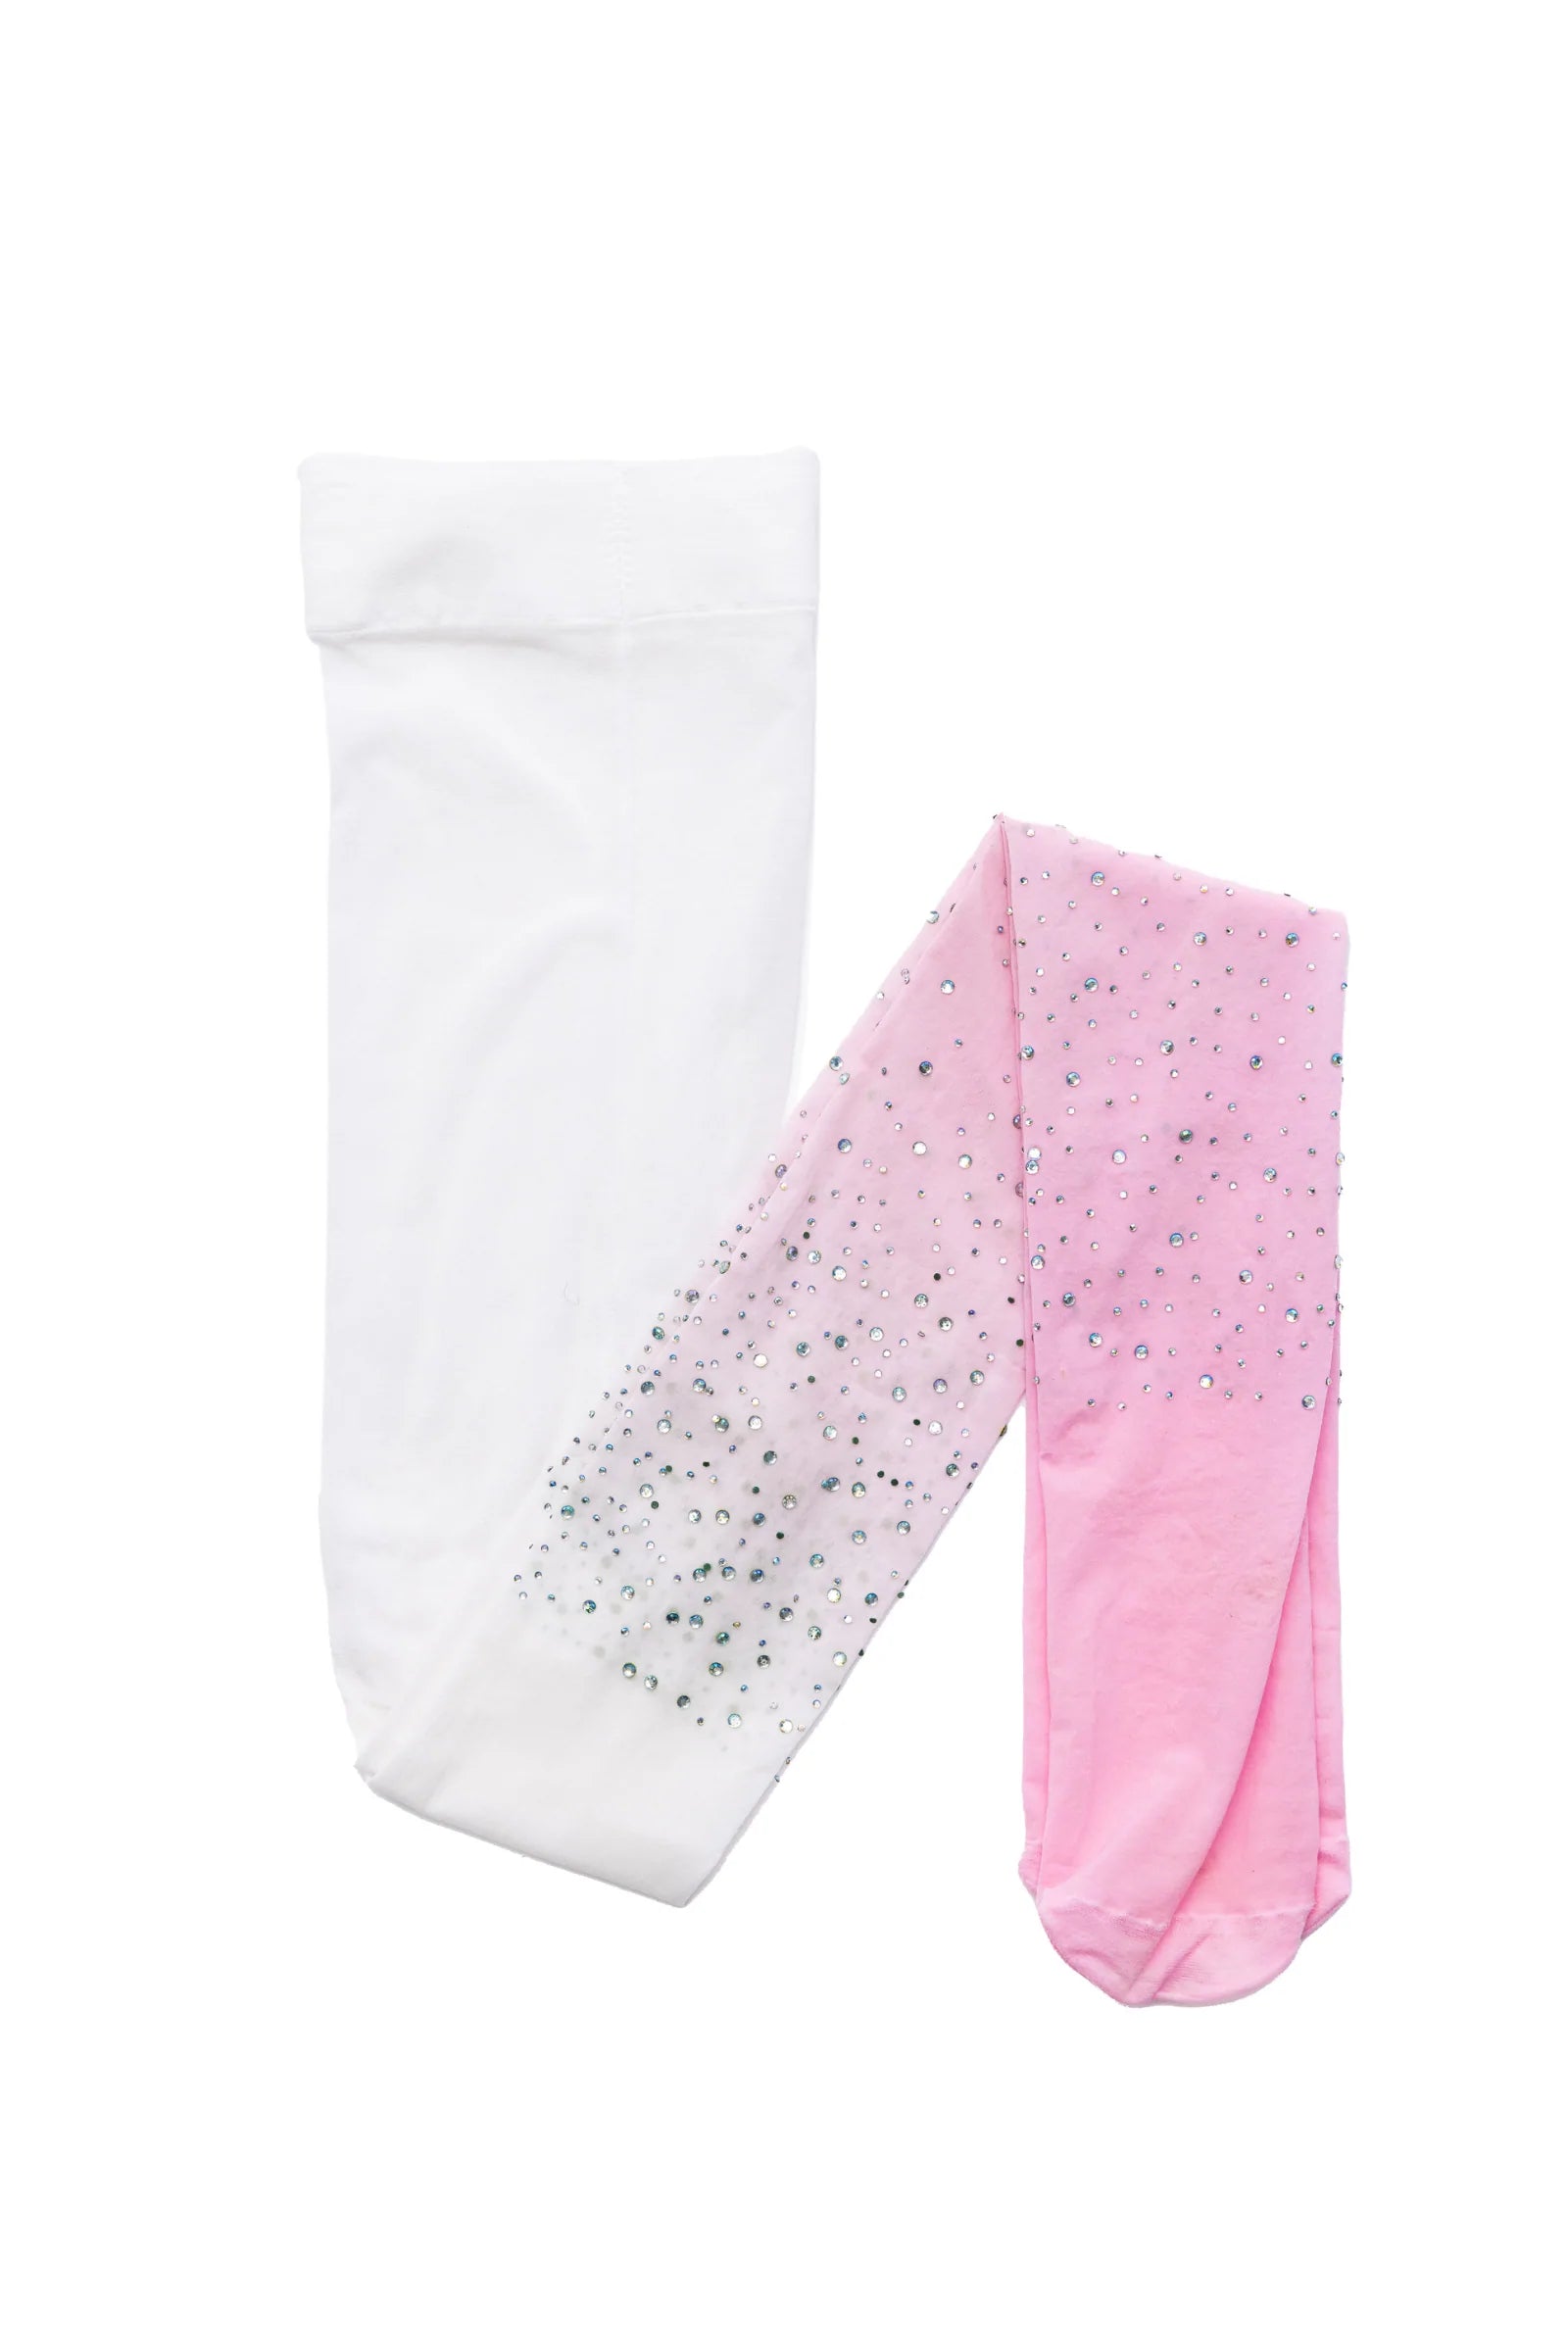 Dress Up - Rhinestone Tights (Ombre: White & Light Pink) – Childish  Tendencies and Wind Drift Gallery